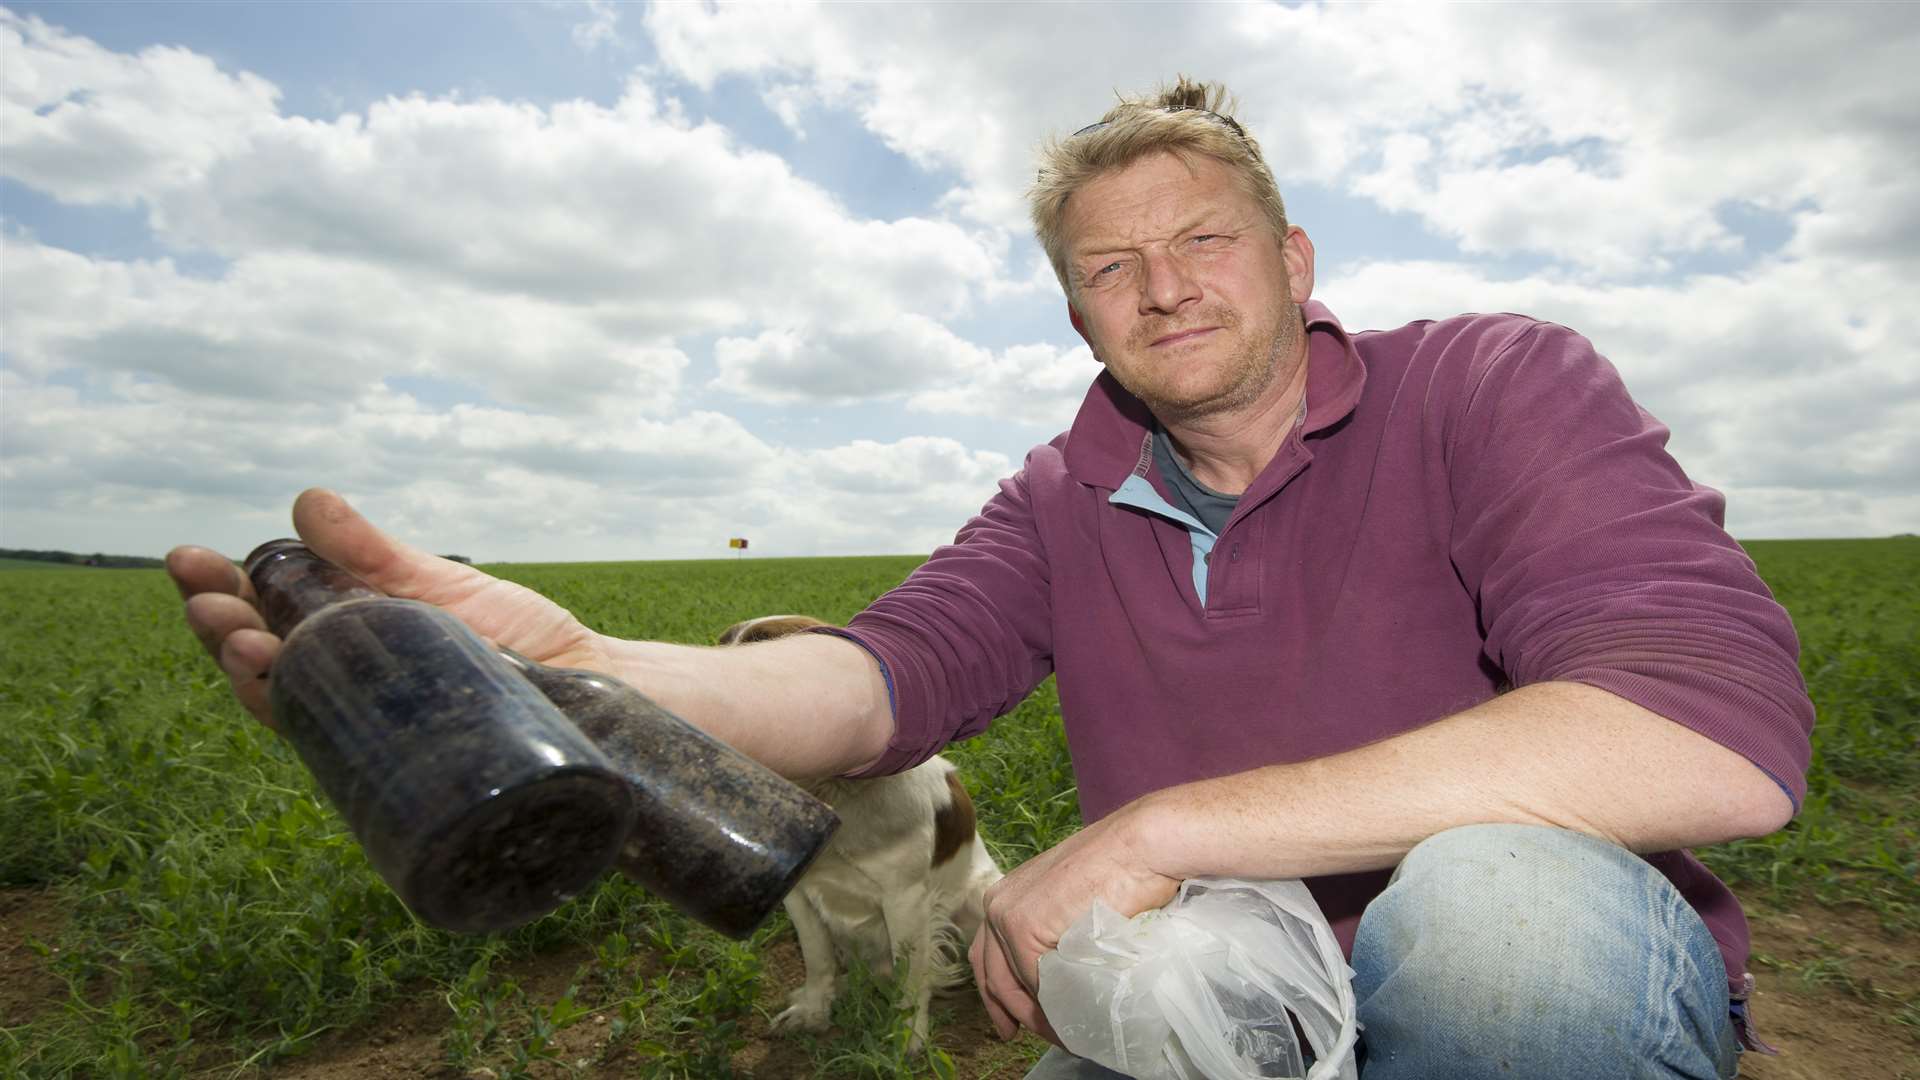 Farmer Mike Barker has spoken out about rubbish left in his fields